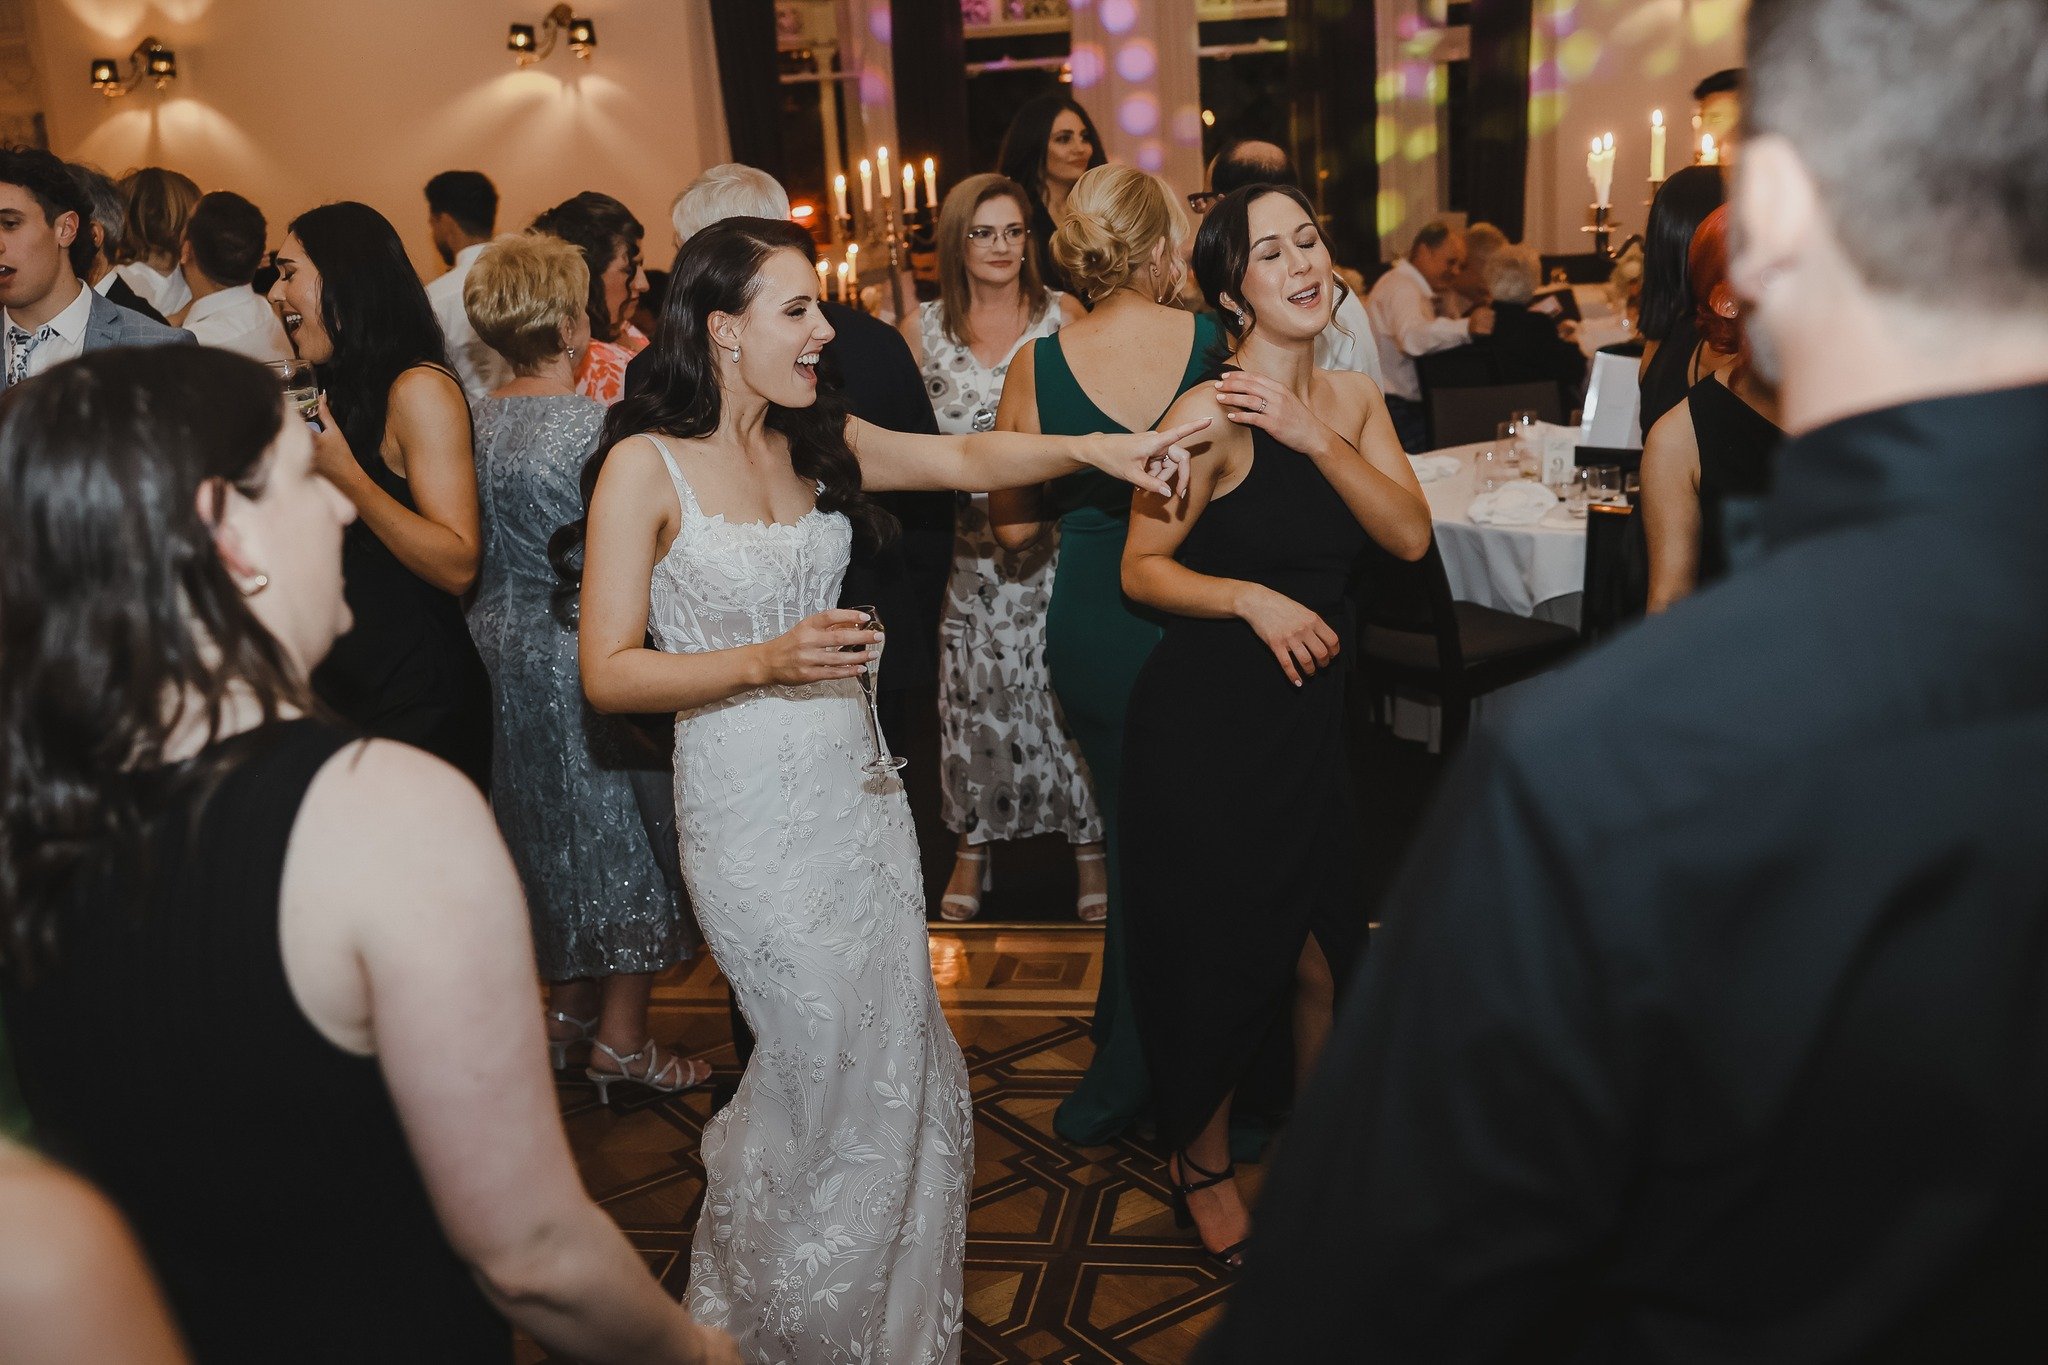 Sing &amp; dance your heart out ❤️🎶📷@duuetweddings